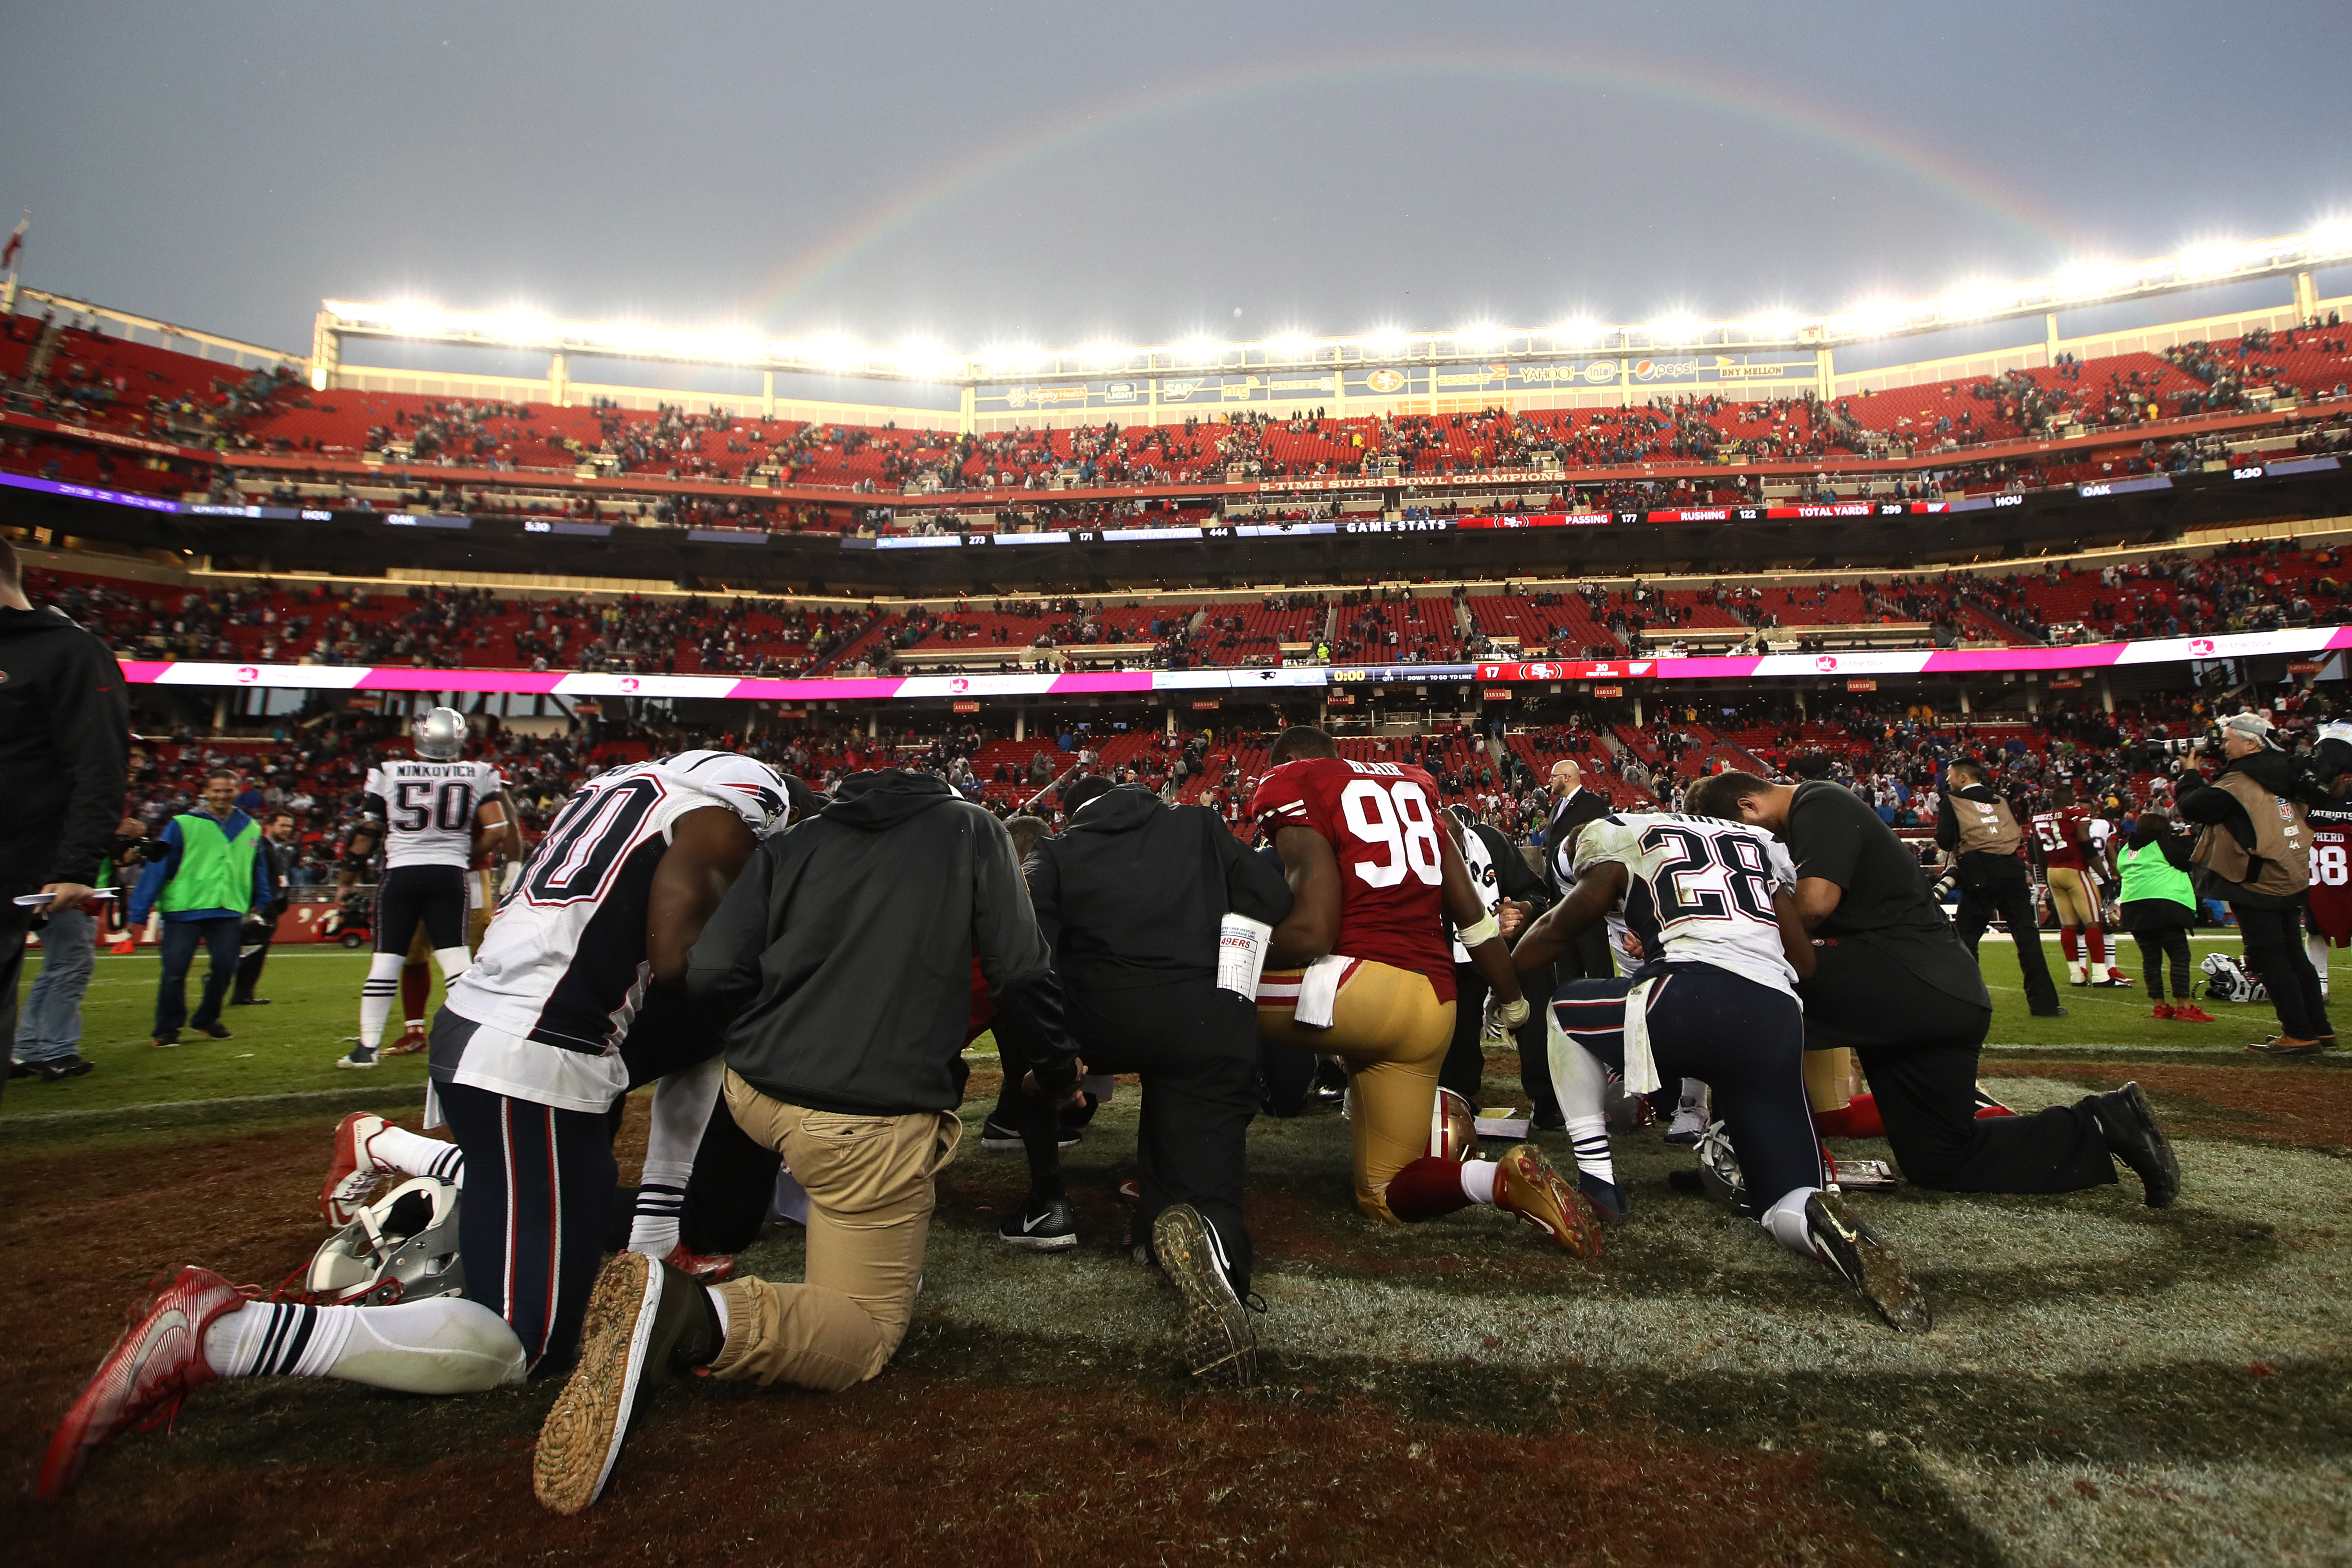 LOOK: Rainbow formed over Levi's Stadium after Patriots' win over 49ers